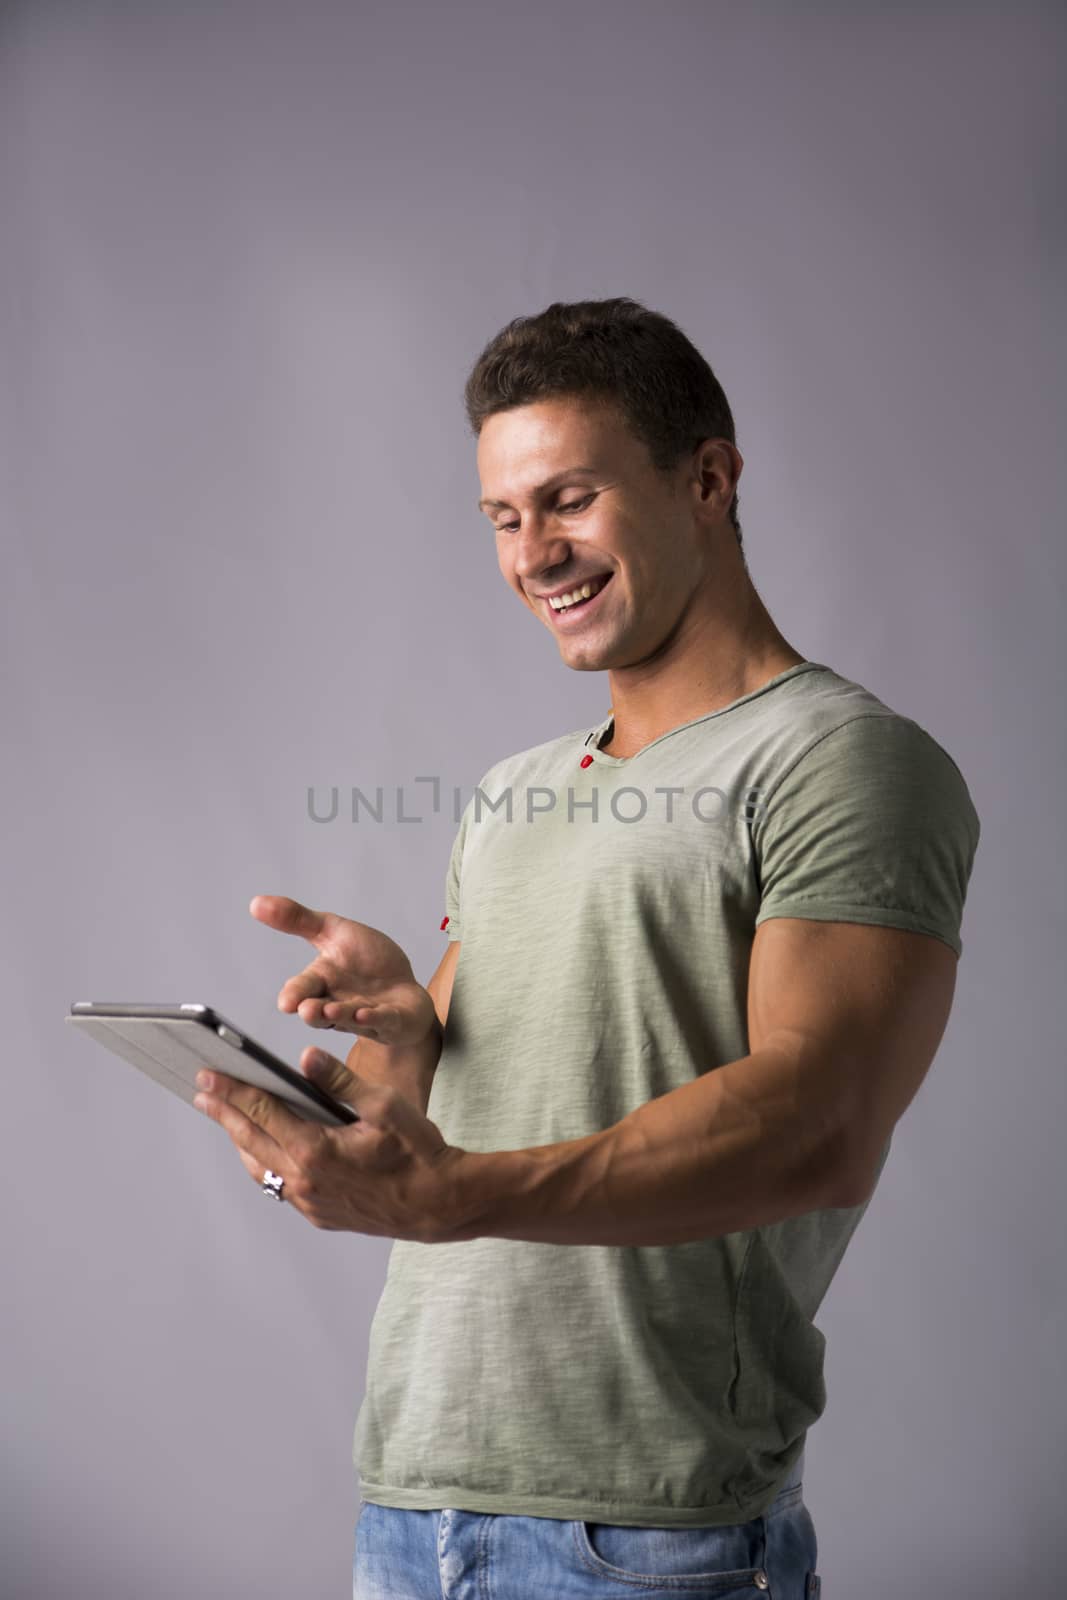 Attractive young man holding ebook reader or tablet PC laughing amused by what he sees, standing on grey background